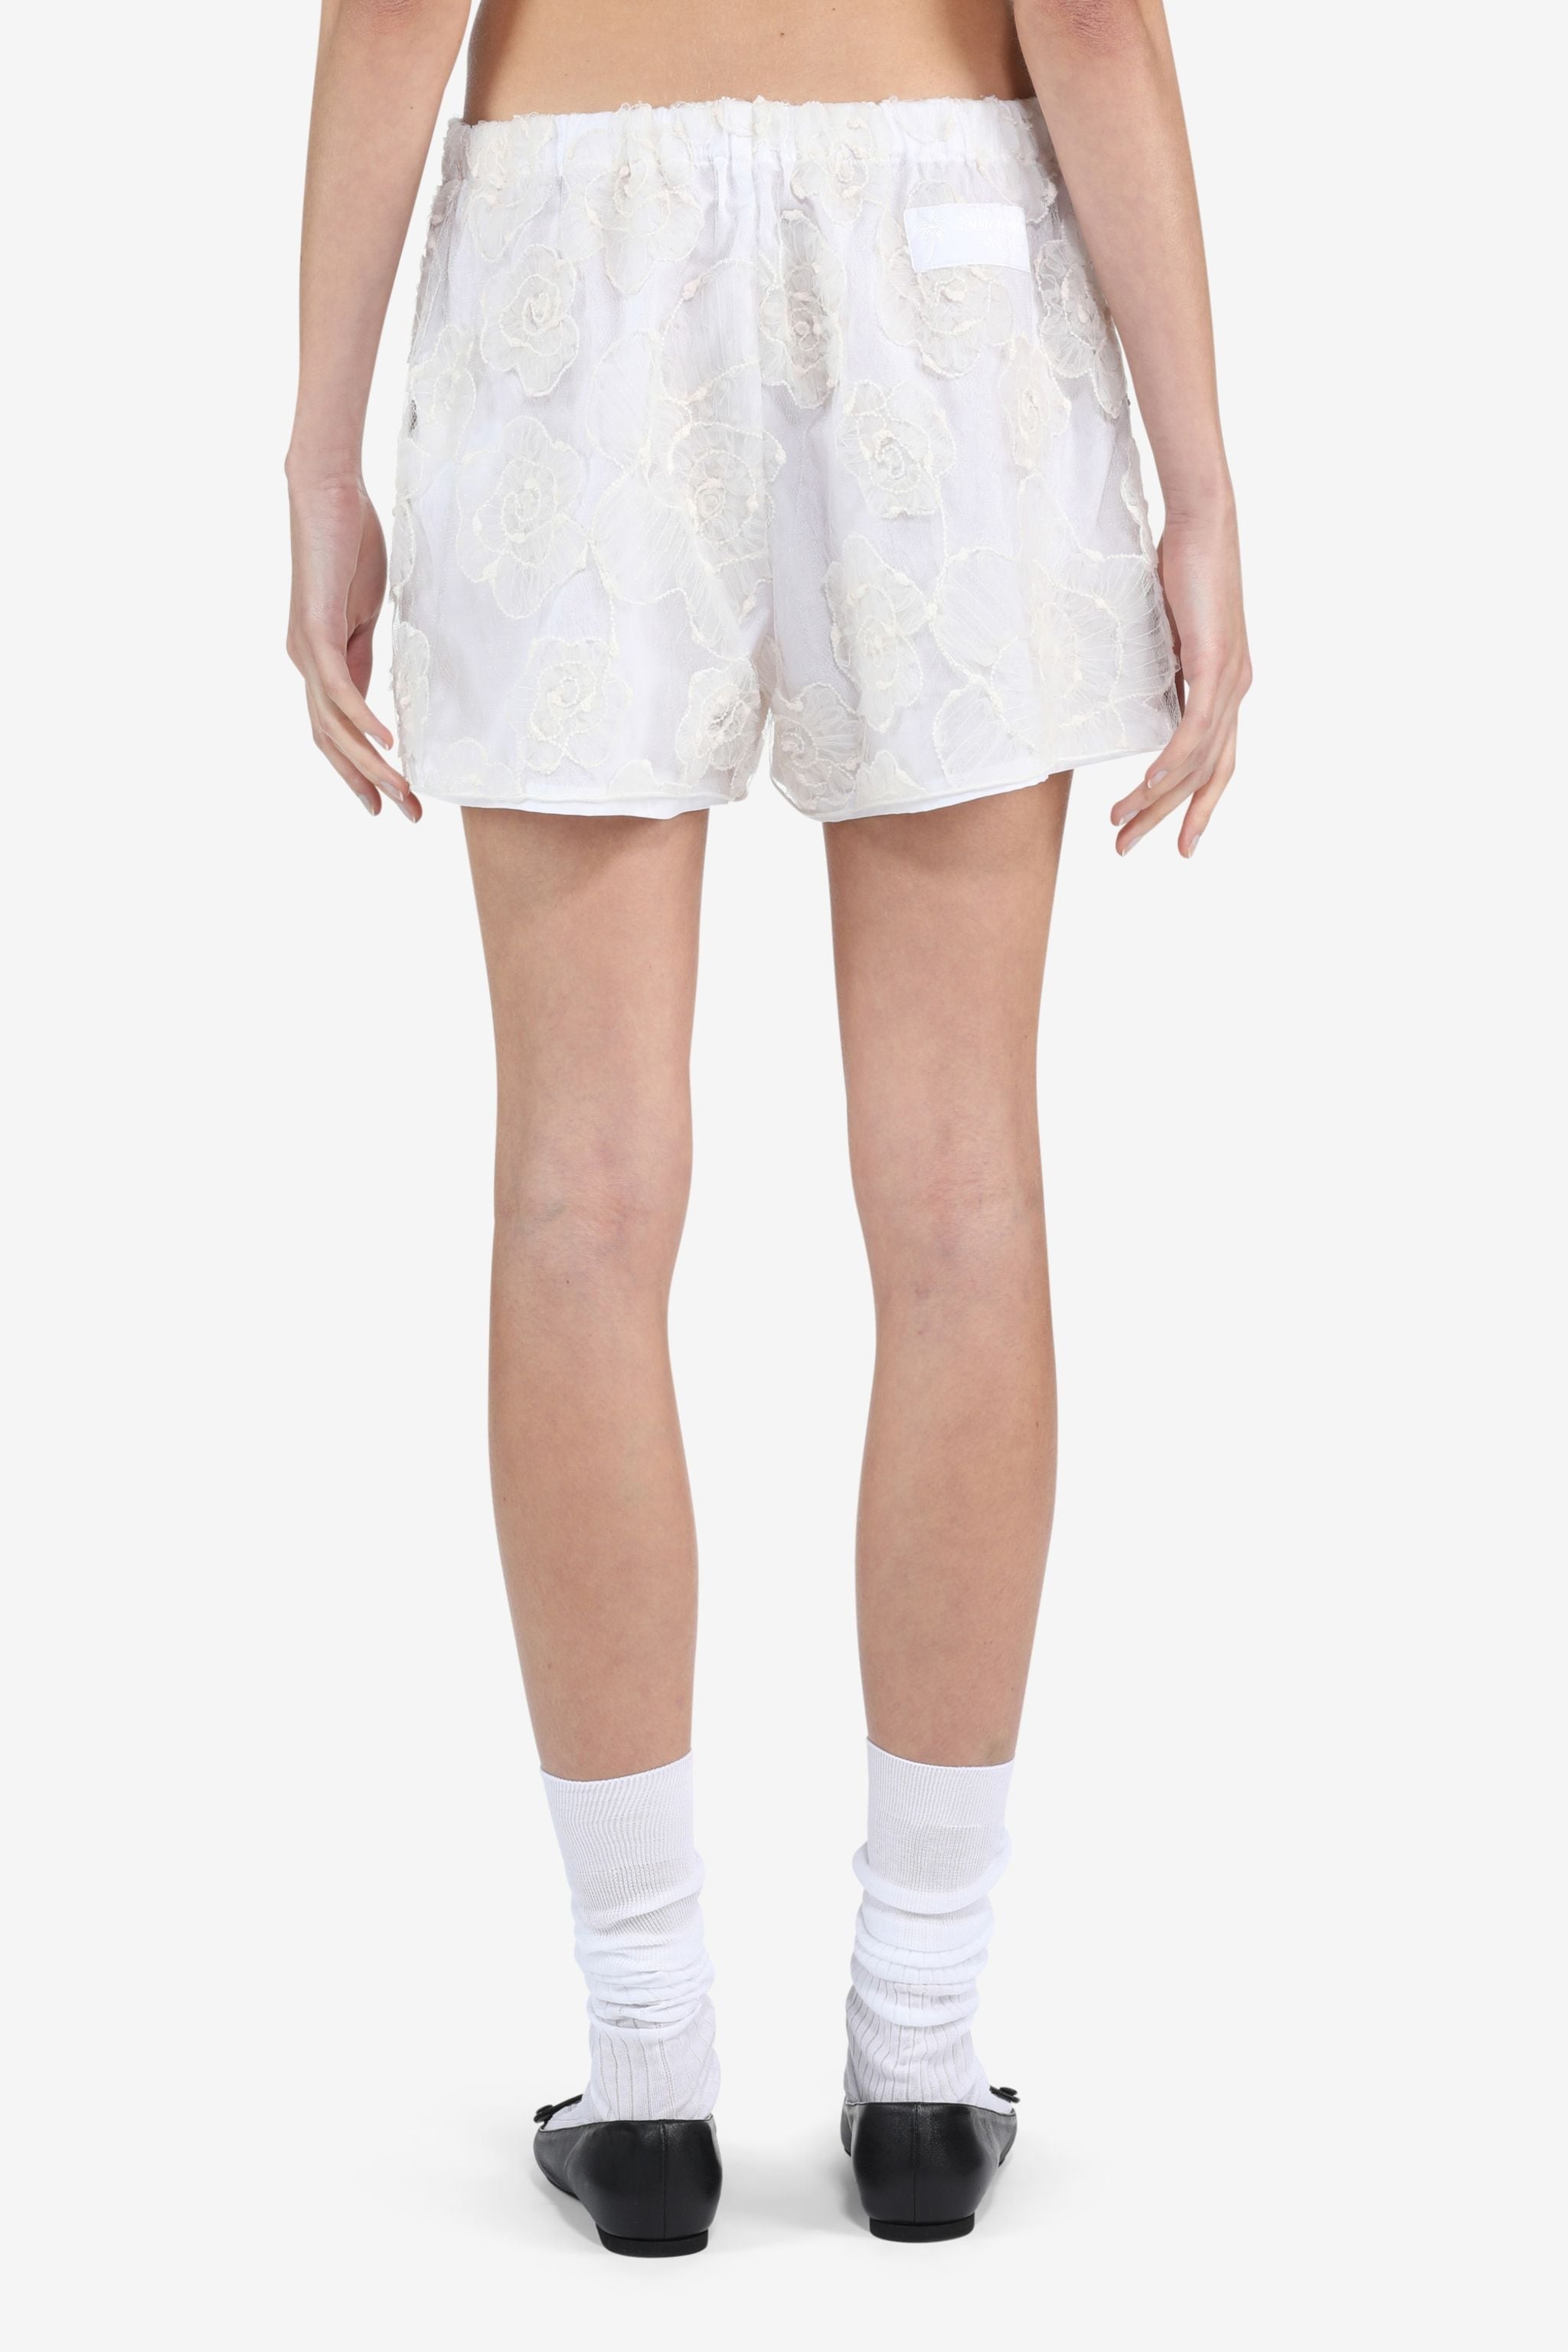 FLORAL-EMBROIDERED SHORTS - 2